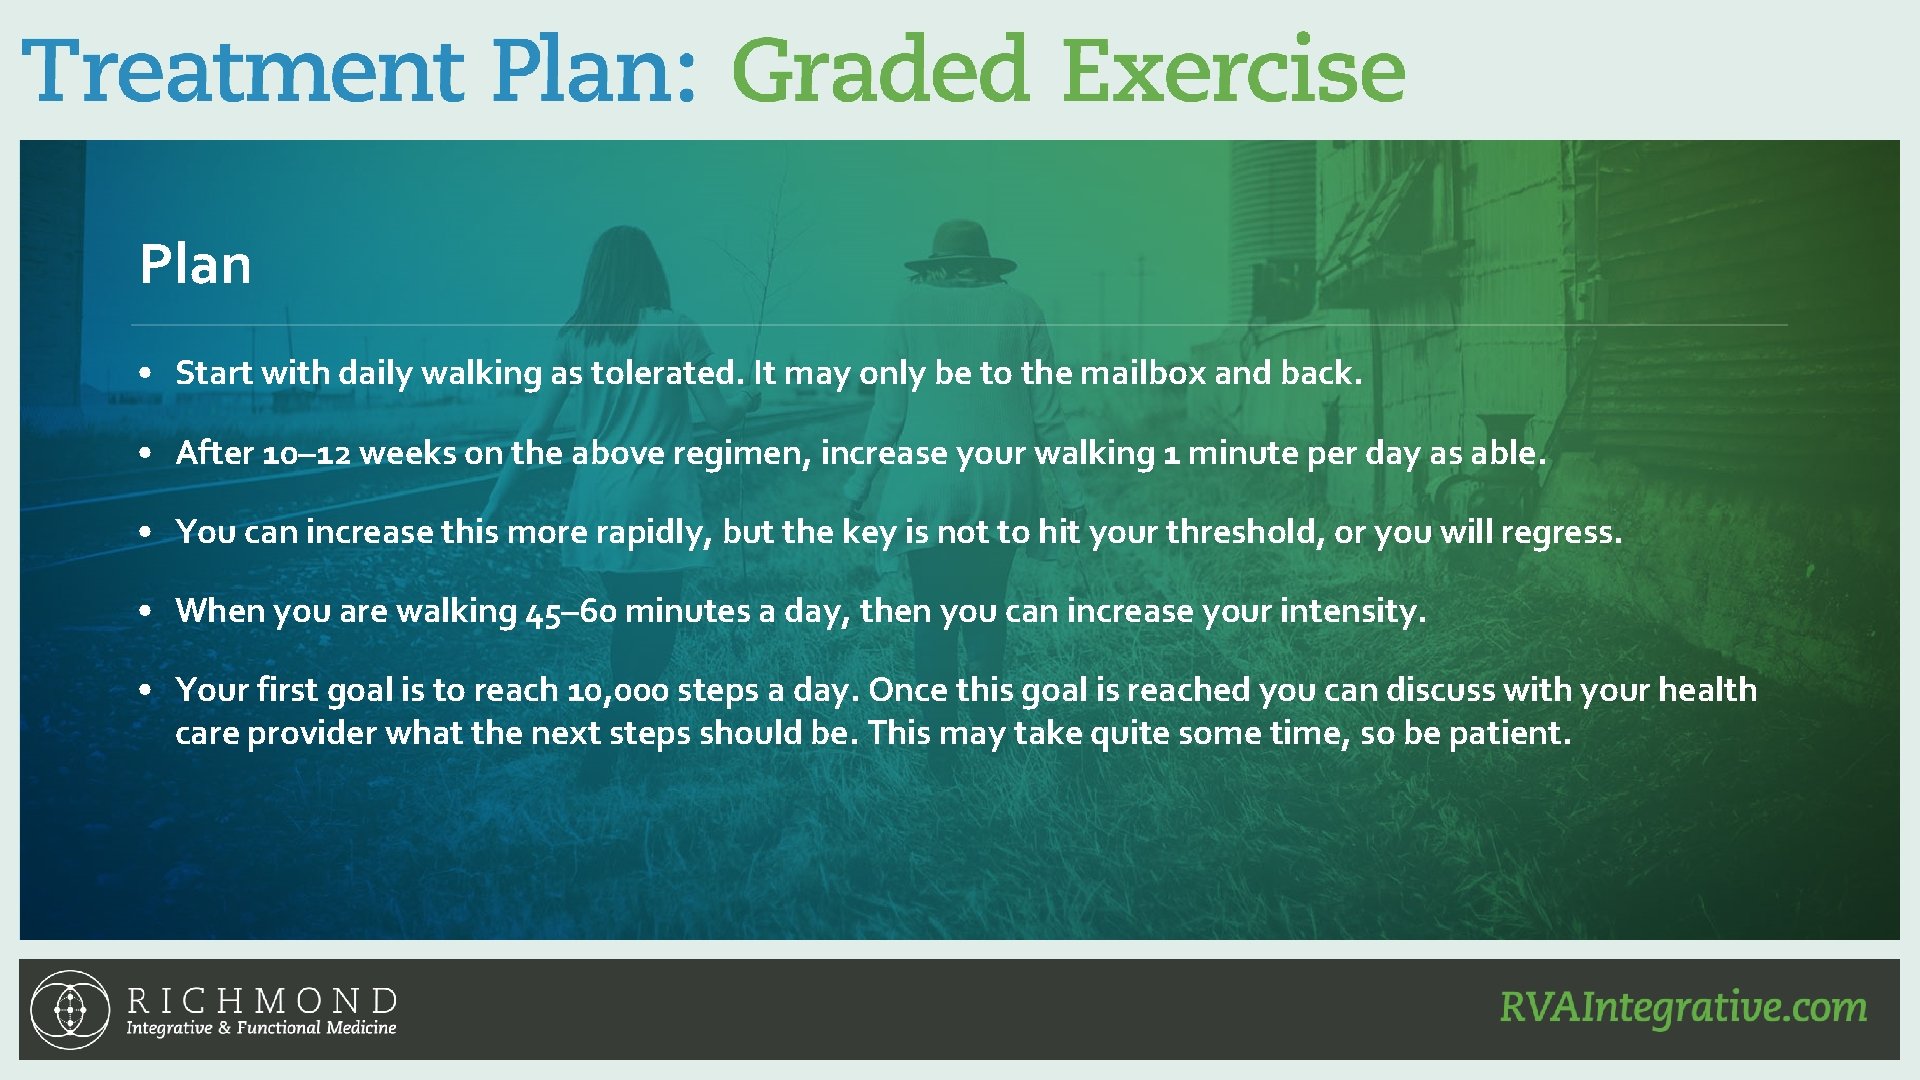 Plan • Start with daily walking as tolerated. It may only be to the